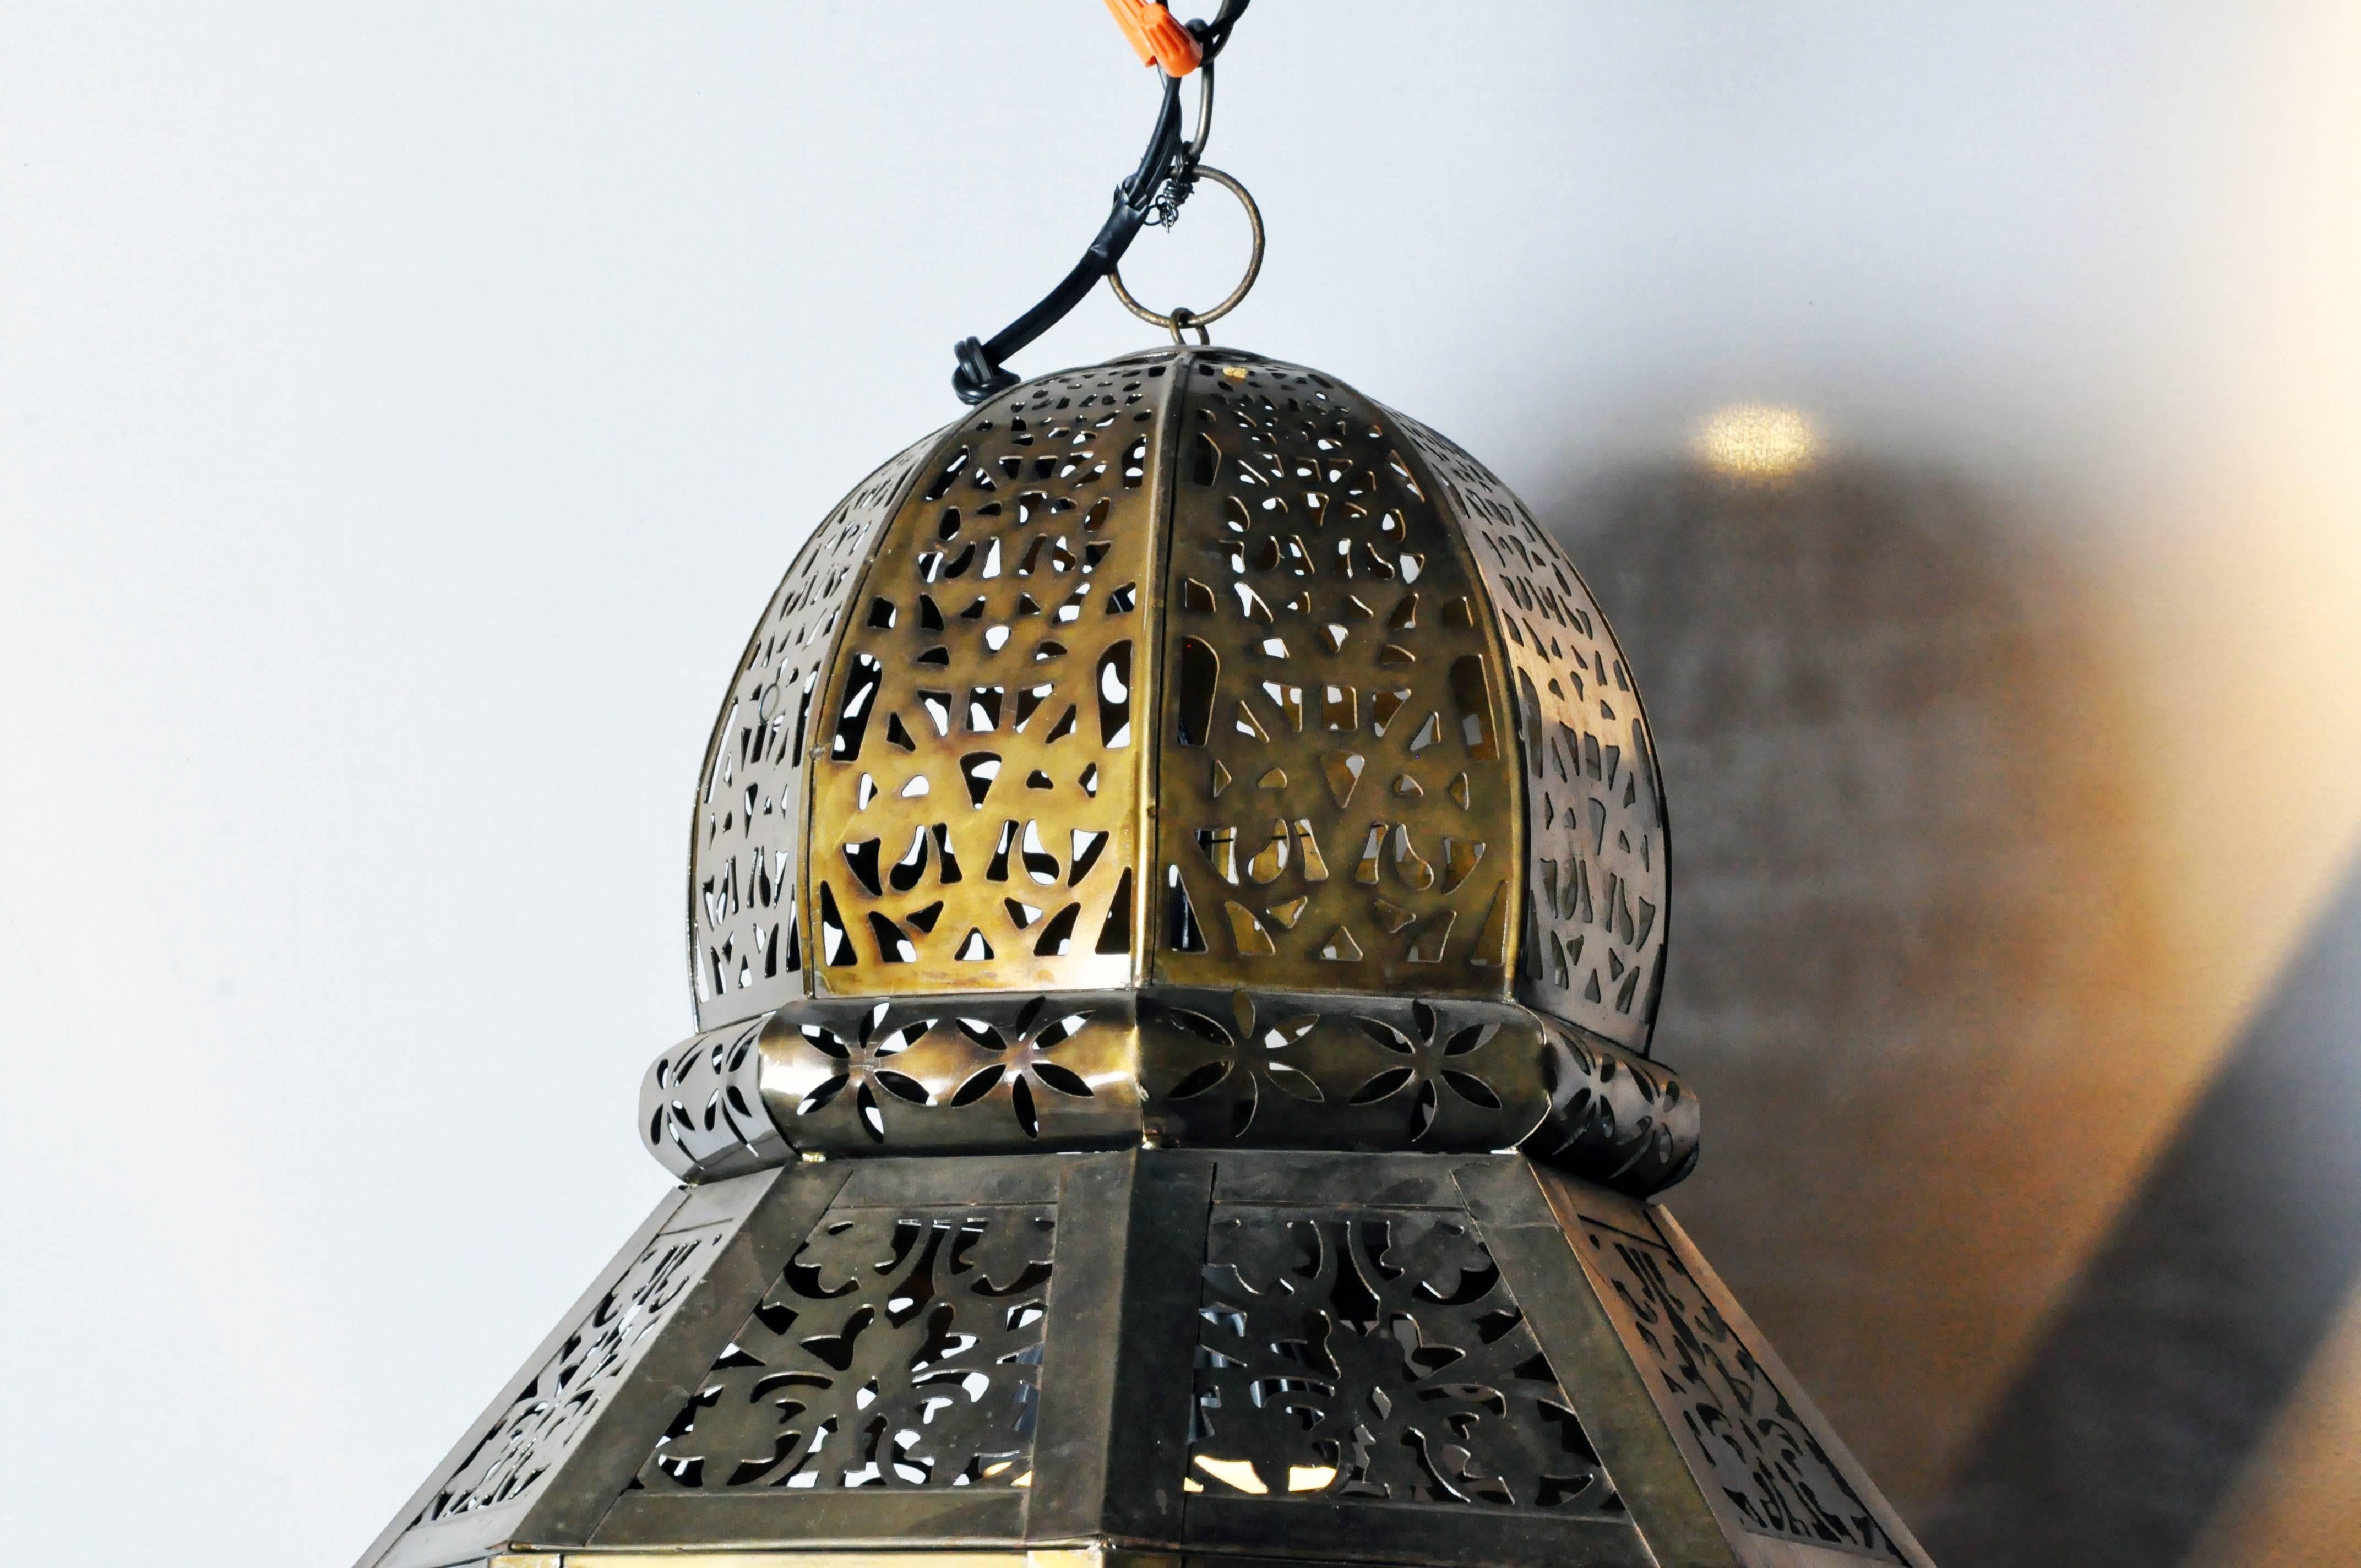 Though newly handcrafted in India, this intricately carved metal lantern channels an old-world feel. When lit it dances to life—adding an exotic flare to any space.